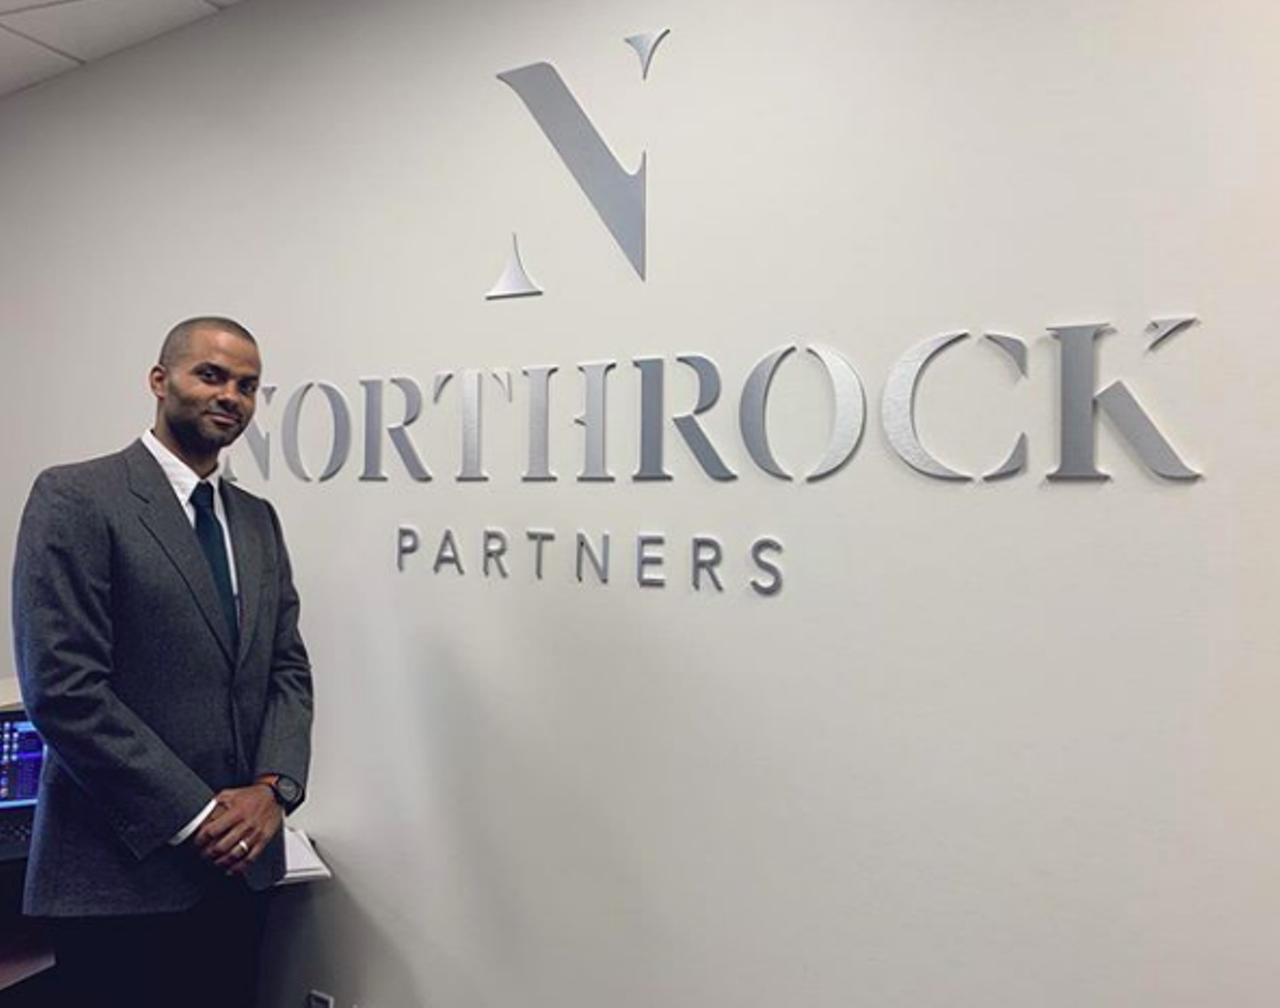 His heart is in San Antonio.
Having joined the Spurs at the young age of 19, and only being 37 now, Tony Parker has spent much of his life in San Antonio. So it only made sense that he move back to the Alamo City after retiring. He’s done one better as he works at Northrock Partners as head of the sports, arts and entertainment division. He’s even said that San Antonio will always be home. He really likes us!
Photo via Instagram / _tonyparker09